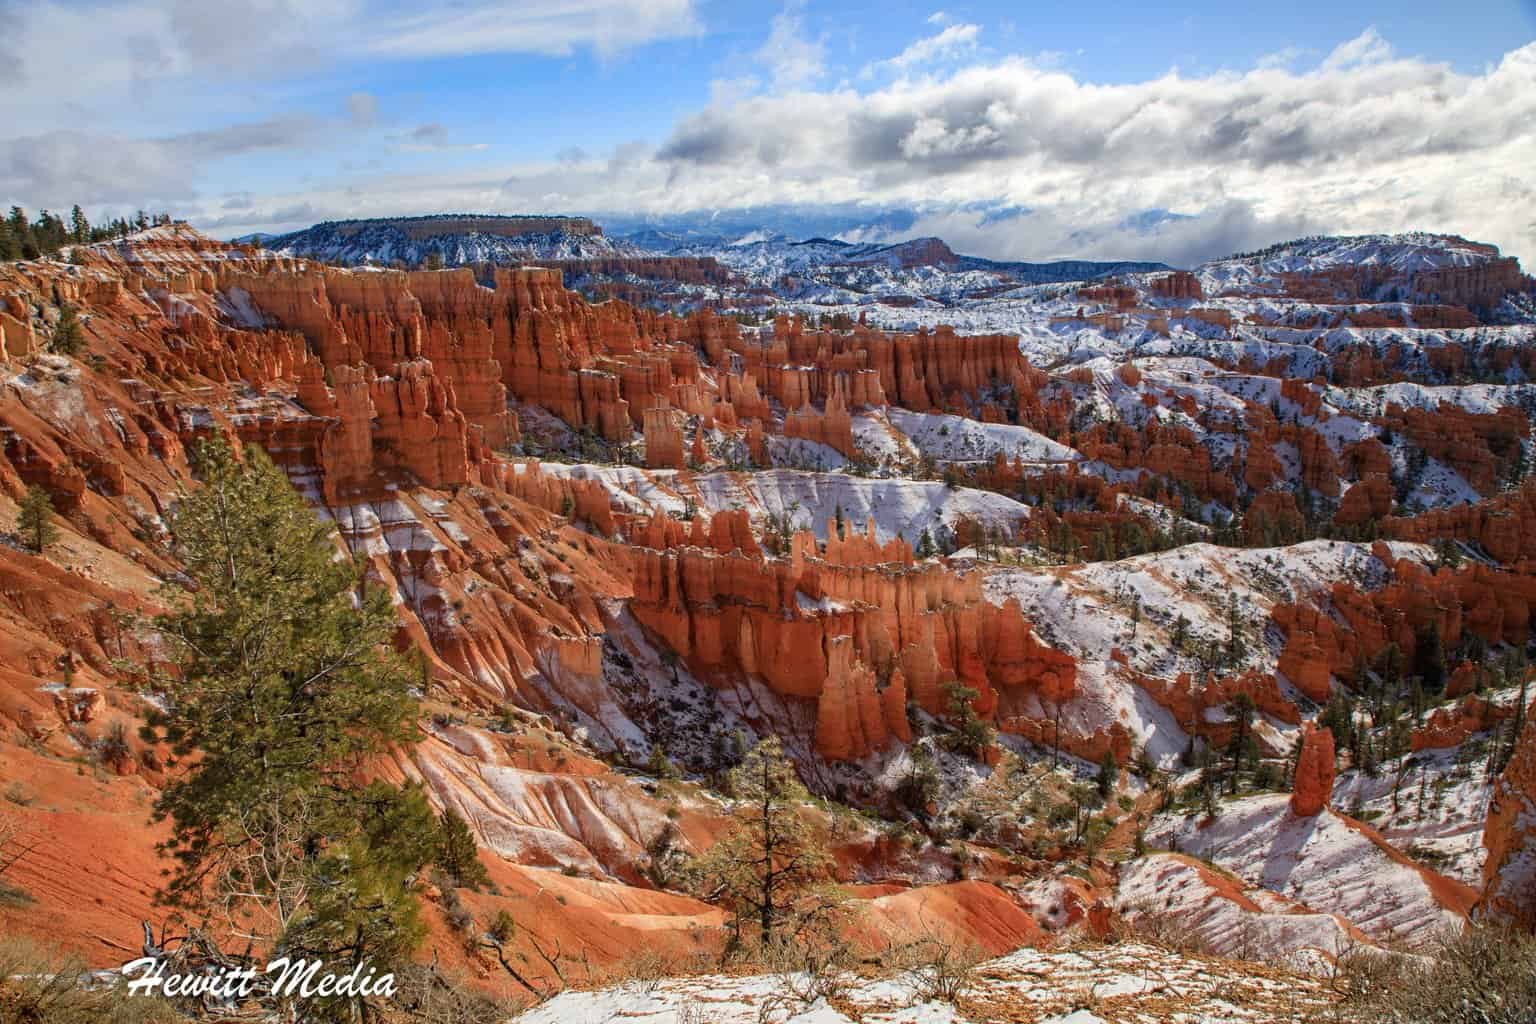 The Best Bryce Canyon National Park Visitor Guide